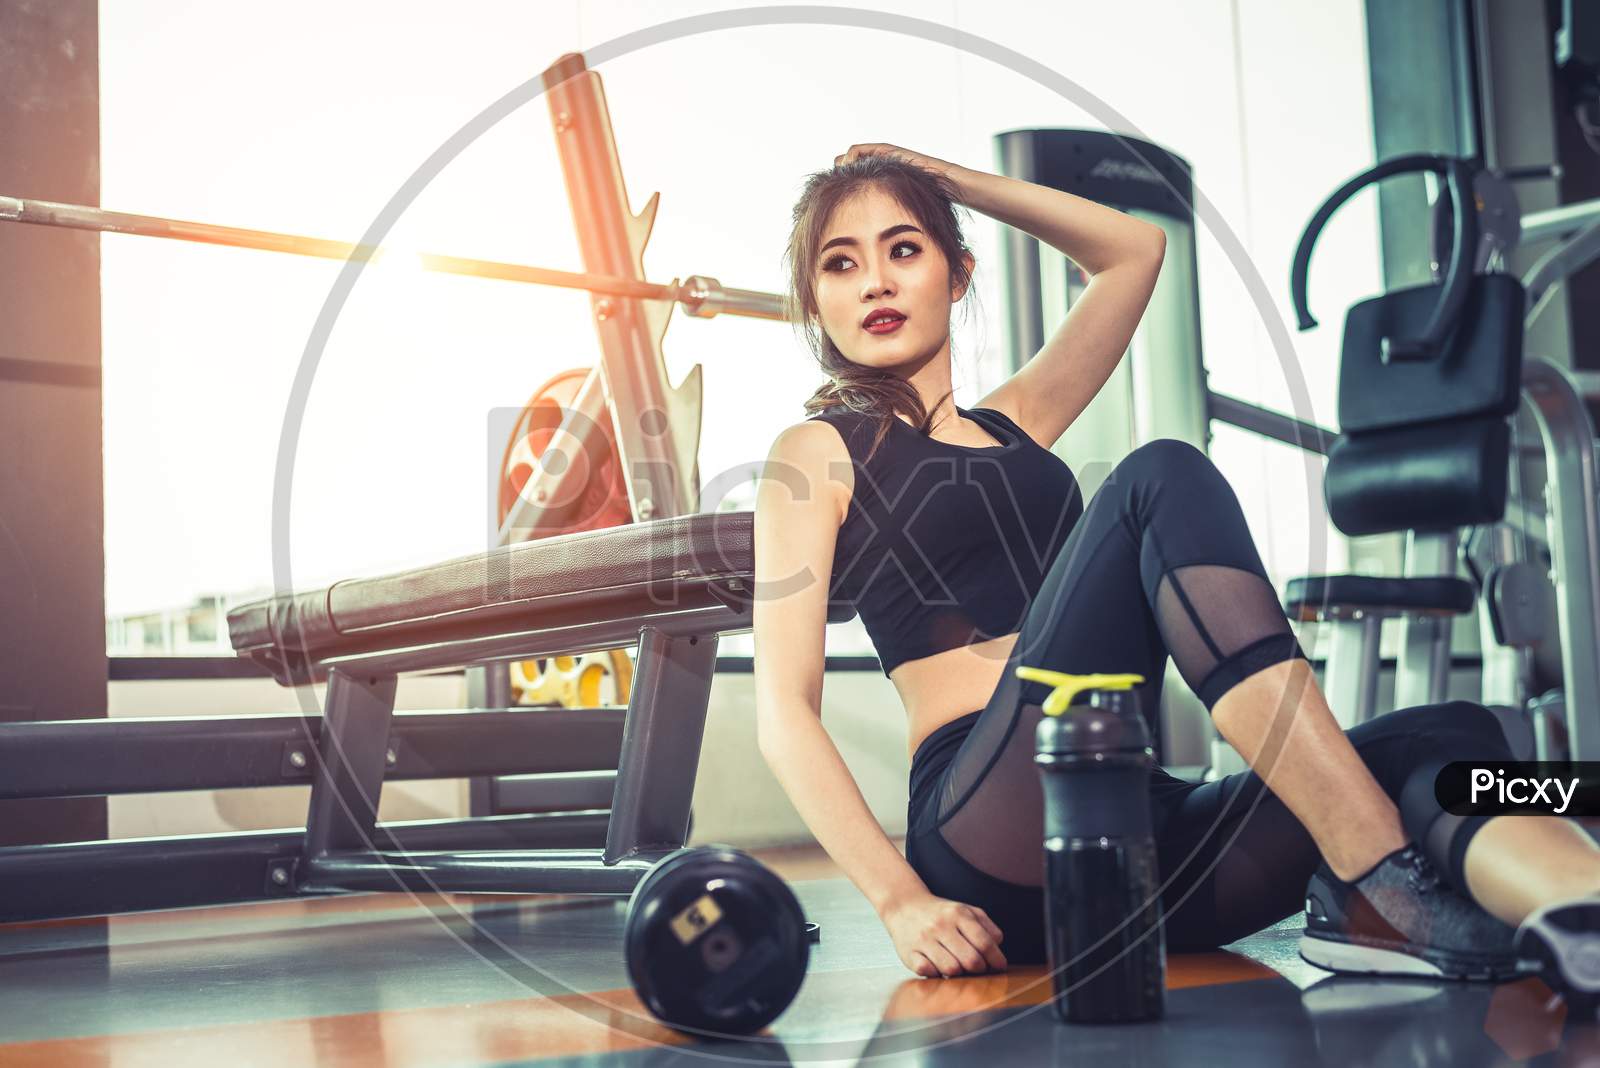 Asian Young Woman Relaxing In Fitness Gym And Sport Club Center With Equipment And Dumbbell. Workout And Strength Training Concept. Beauty And Healthy Theme. Gymnasium Background